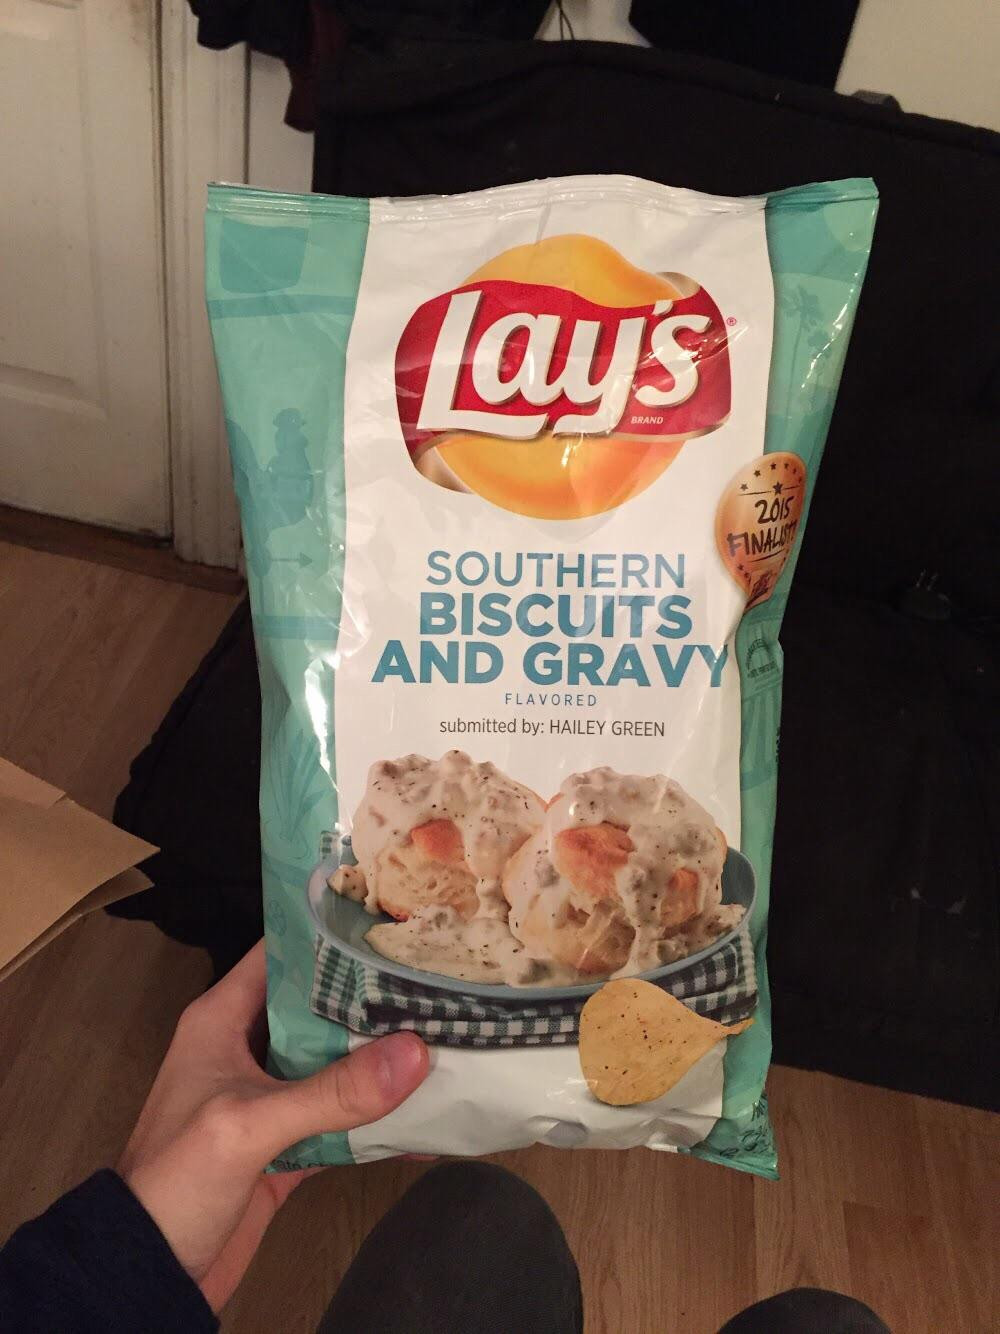 Lays Southern Biscuit And Gravy
 Bought a bag of Southern Biscuits and Gravy flavored Lays